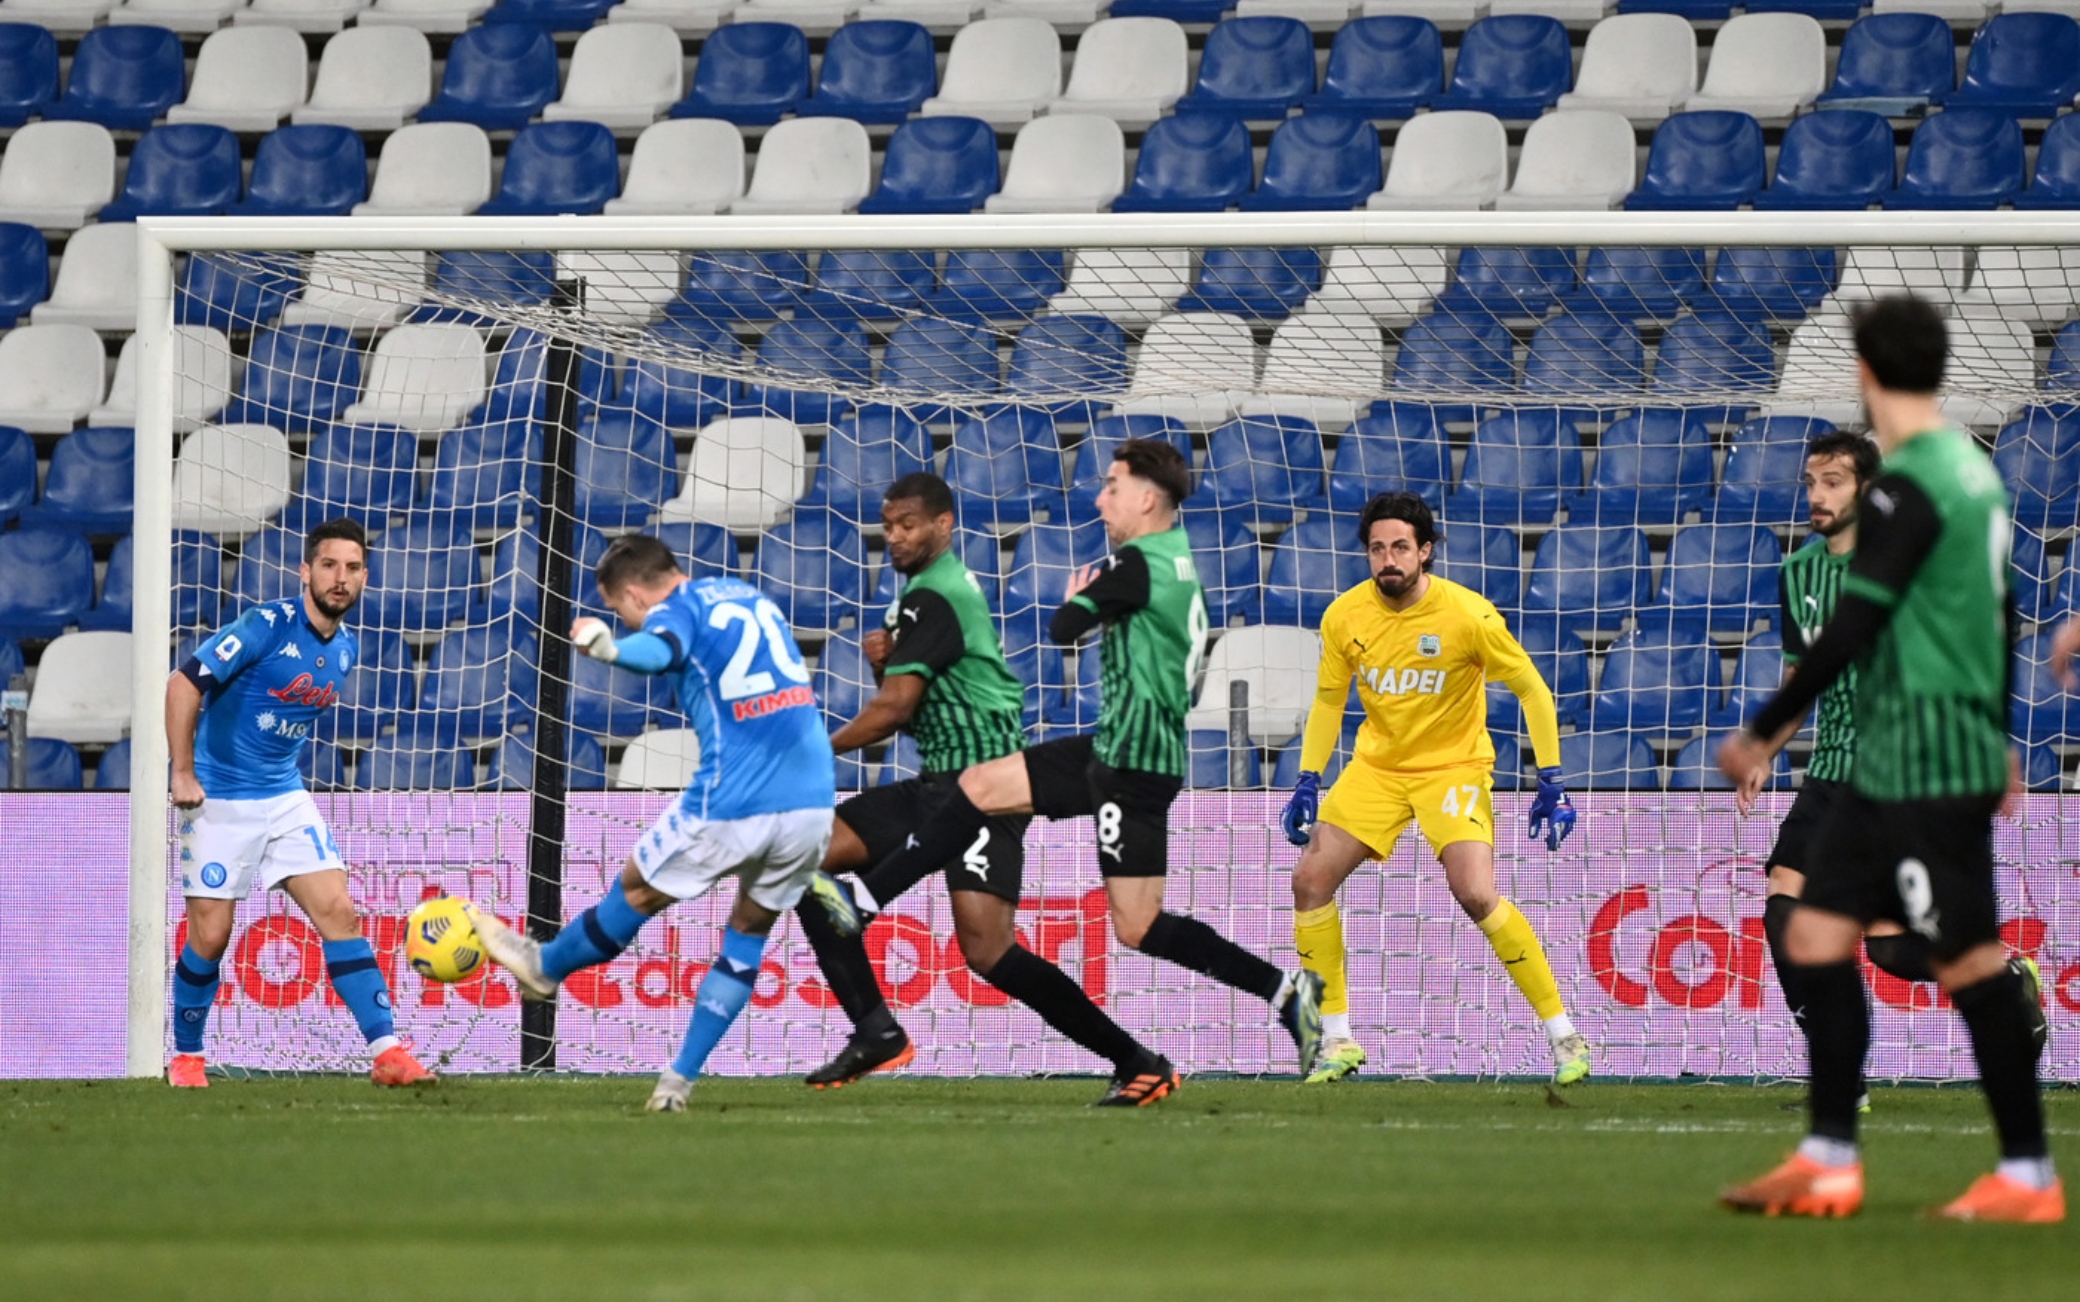 There were six goals scored at the Mapei Stadium - Città del Tricolore as Sassuolo and Napoli could not be separated by full-time